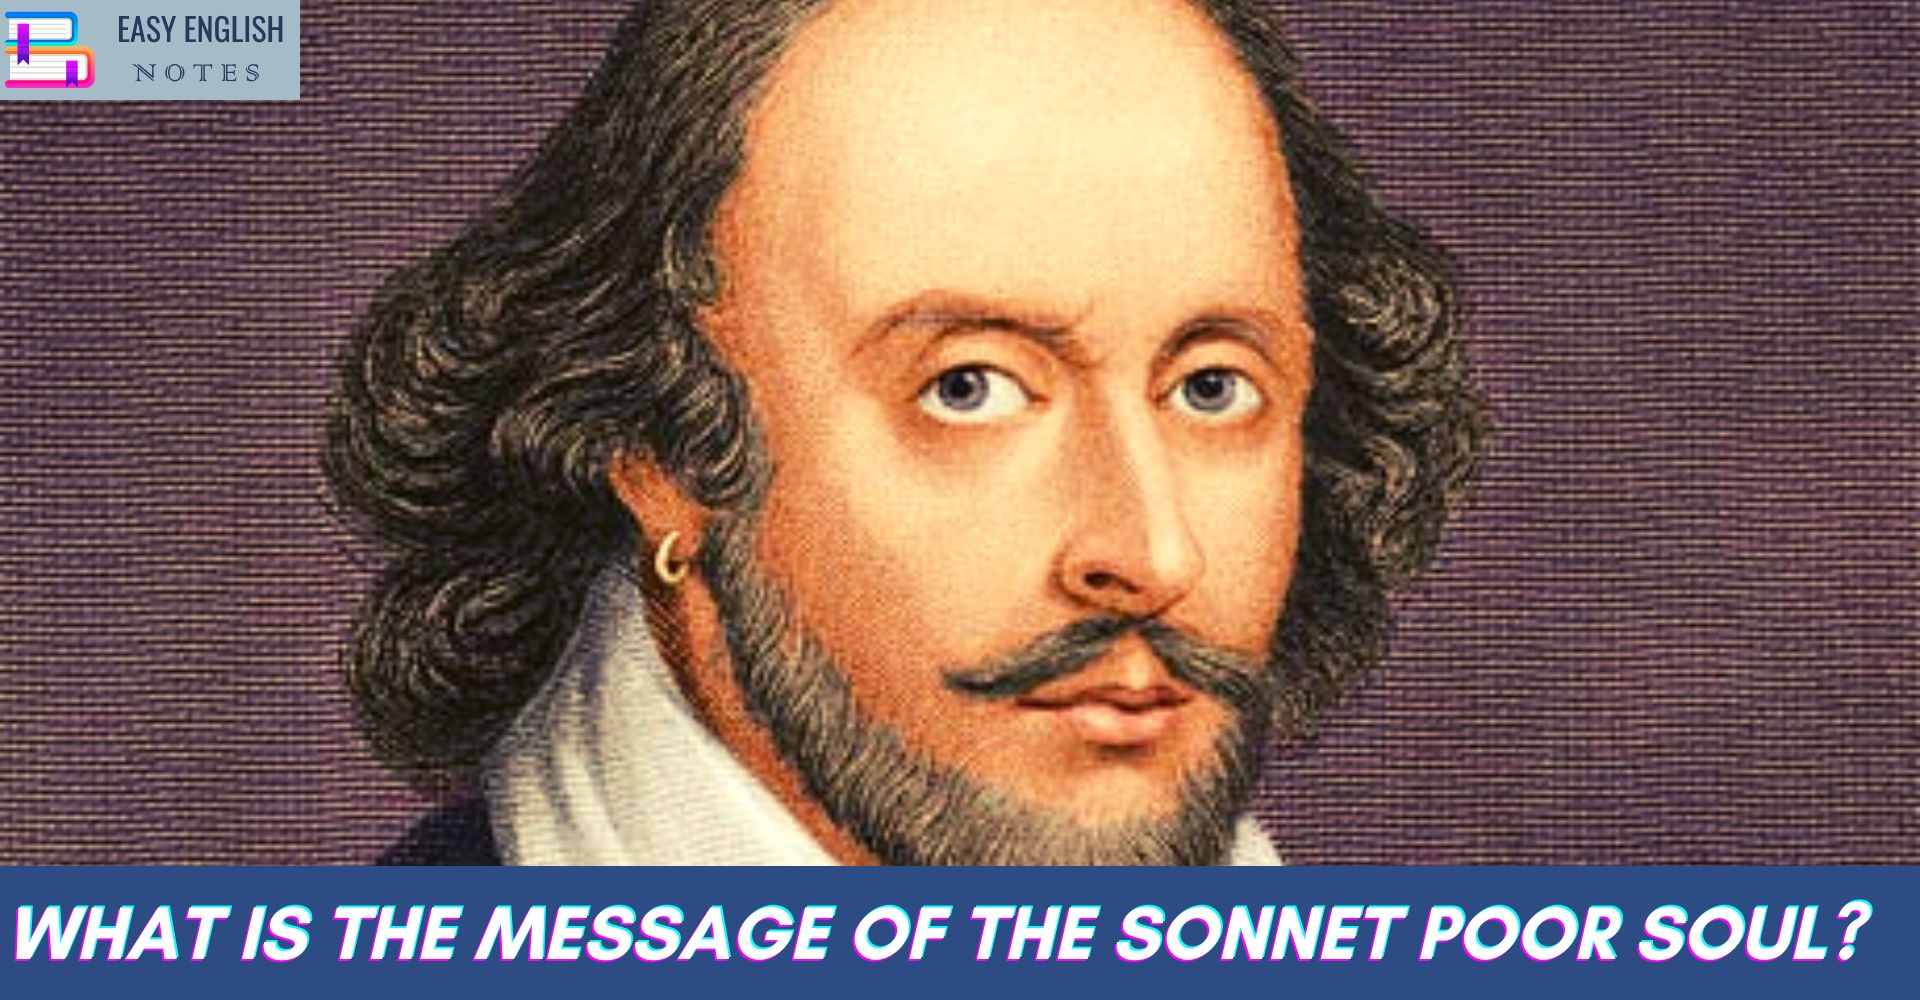 What is the message of the sonnet Poor Soul?